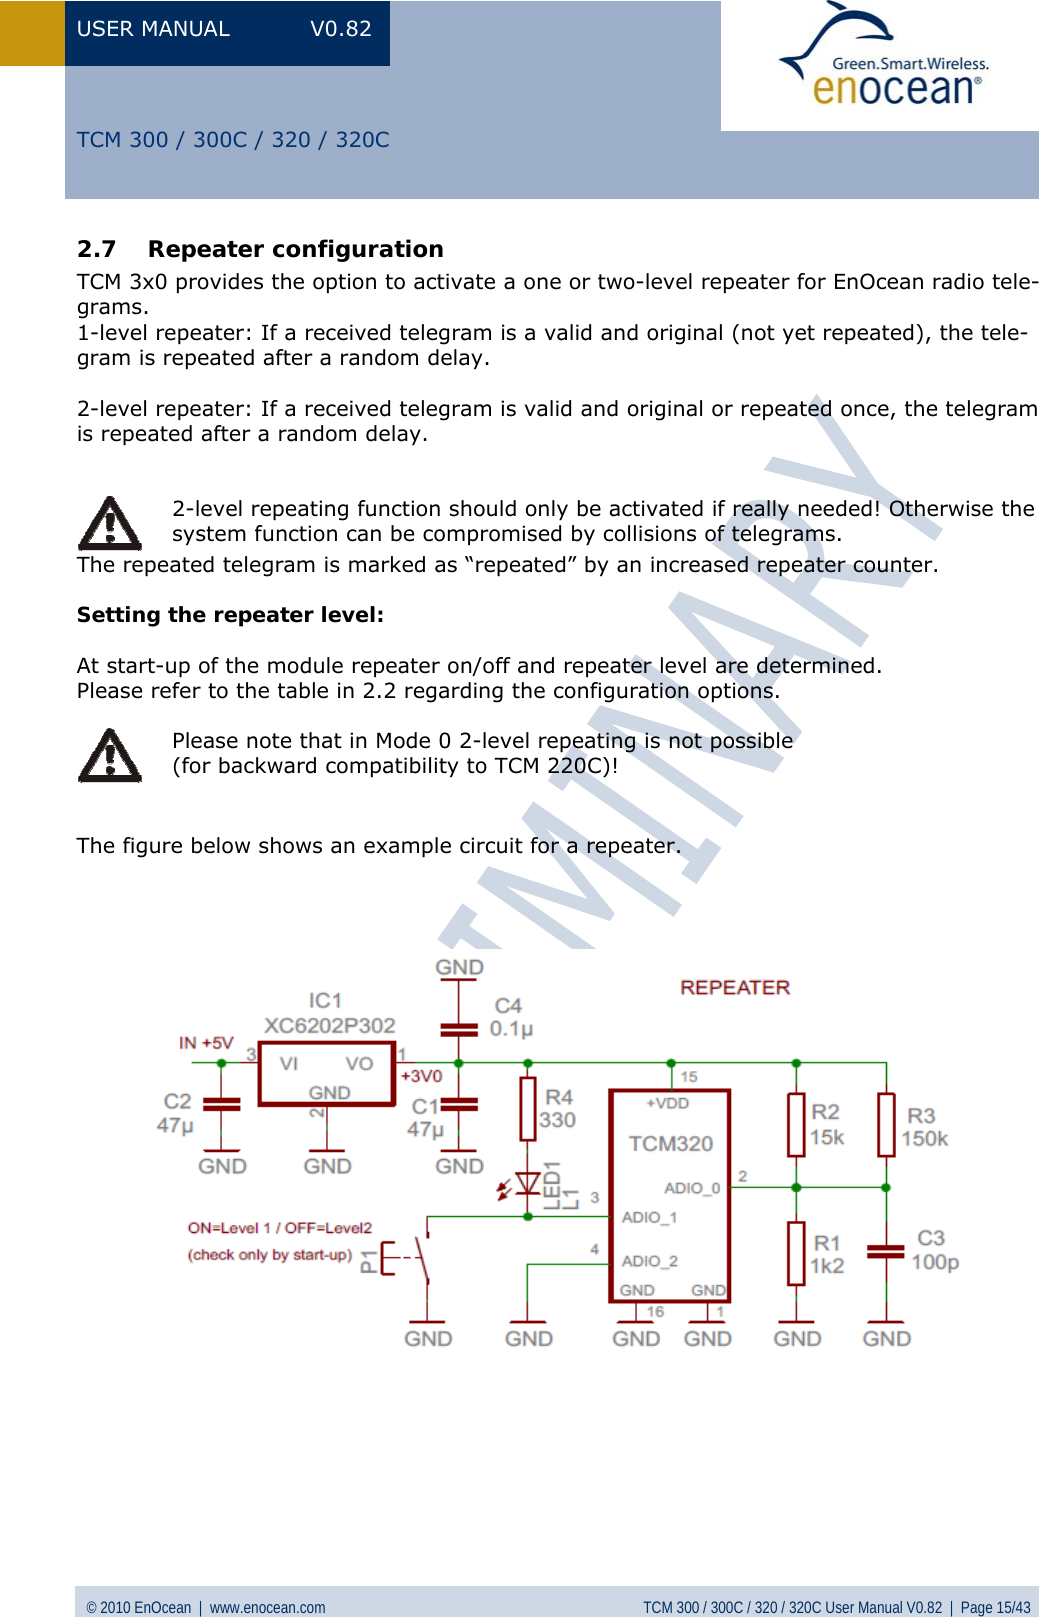 USER MANUAL V0.82 © 2010 EnOcean  |  www.enocean.com  TCM 300 / 300C / 320 / 320C User Manual V0.82  |  Page 15/43   TCM 300 / 300C / 320 / 320C 2.7 Repeater configuration TCM 3x0 provides the option to activate a one or two-level repeater for EnOcean radio tele-grams. 1-level repeater: If a received telegram is a valid and original (not yet repeated), the tele-gram is repeated after a random delay.  2-level repeater: If a received telegram is valid and original or repeated once, the telegram is repeated after a random delay.  The repeated telegram is marked as “repeated” by an increased repeater counter.   Setting the repeater level:  At start-up of the module repeater on/off and repeater level are determined. Please refer to the table in  2.2 regarding the configuration options.   The figure below shows an example circuit for a repeater.                           2-level repeating function should only be activated if really needed! Otherwise the system function can be compromised by collisions of telegrams.  Please note that in Mode 0 2-level repeating is not possible  (for backward compatibility to TCM 220C)! 